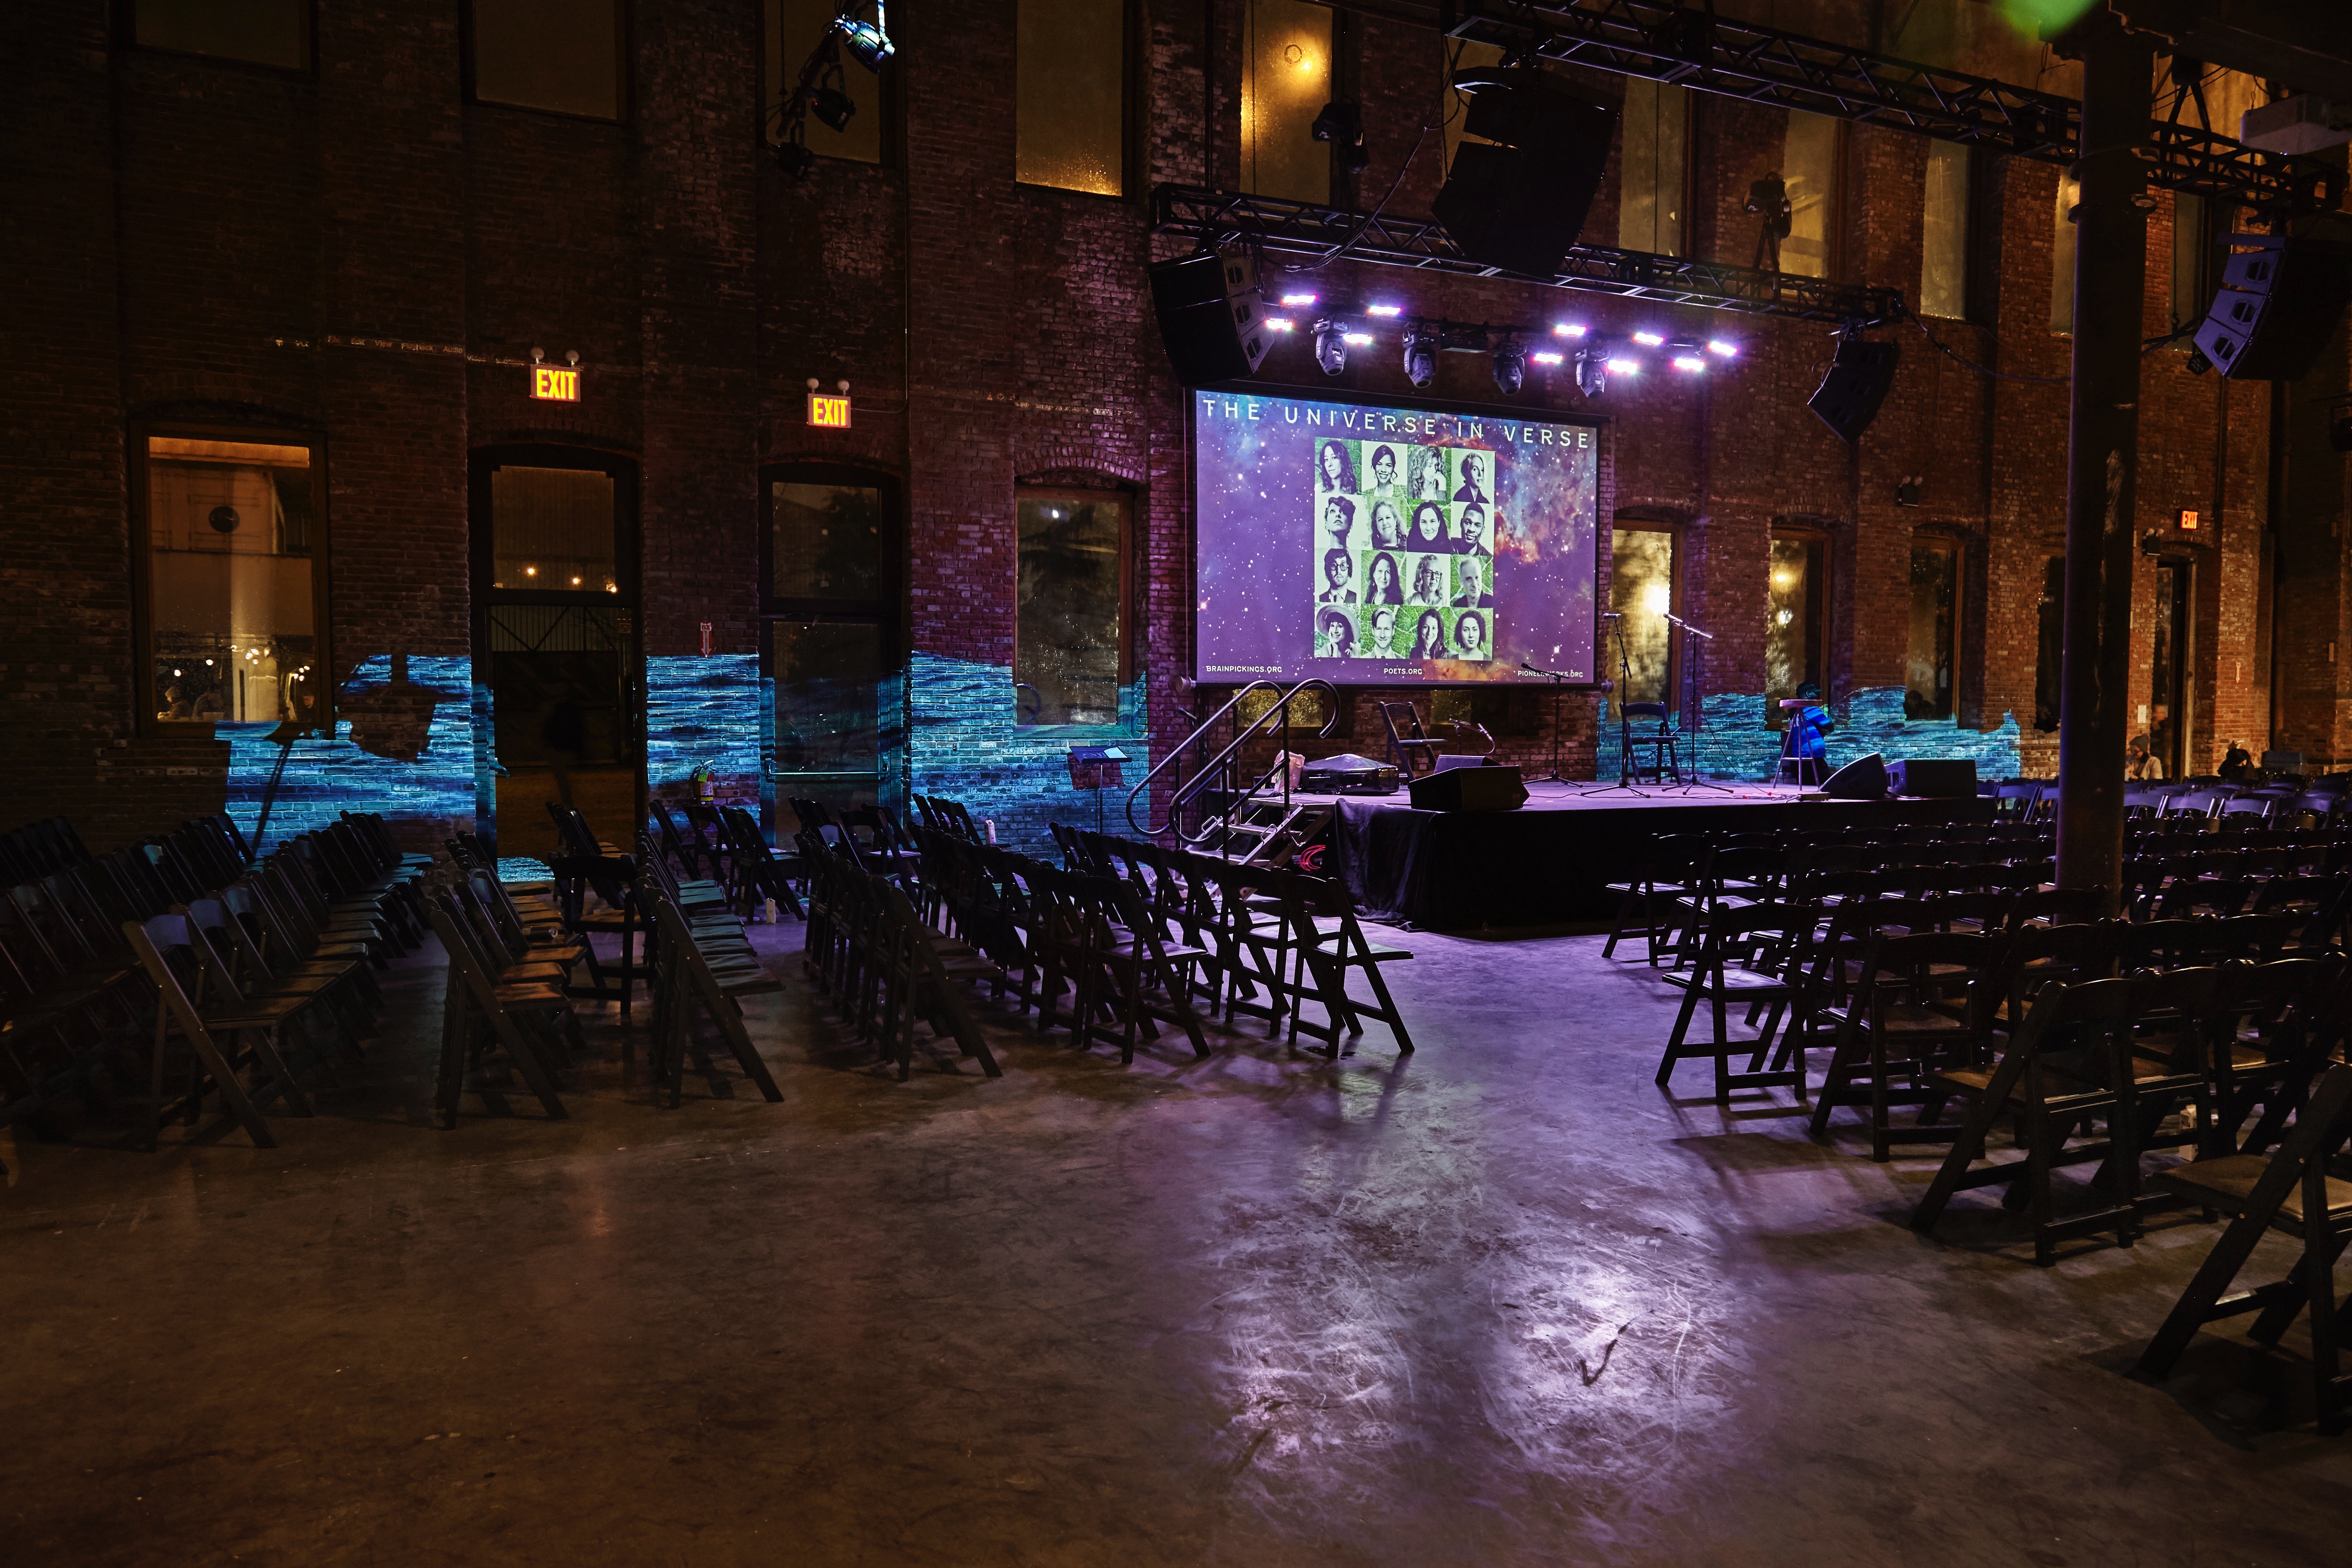 Small thumbnail image of Photograph of a large empty room with over a hundred empty folding chairs. A small stage is in the center and above it a screen indicates the name of the event: 'The Universe In Verse.' A video of a body of water is projected on the brick wall in the background.